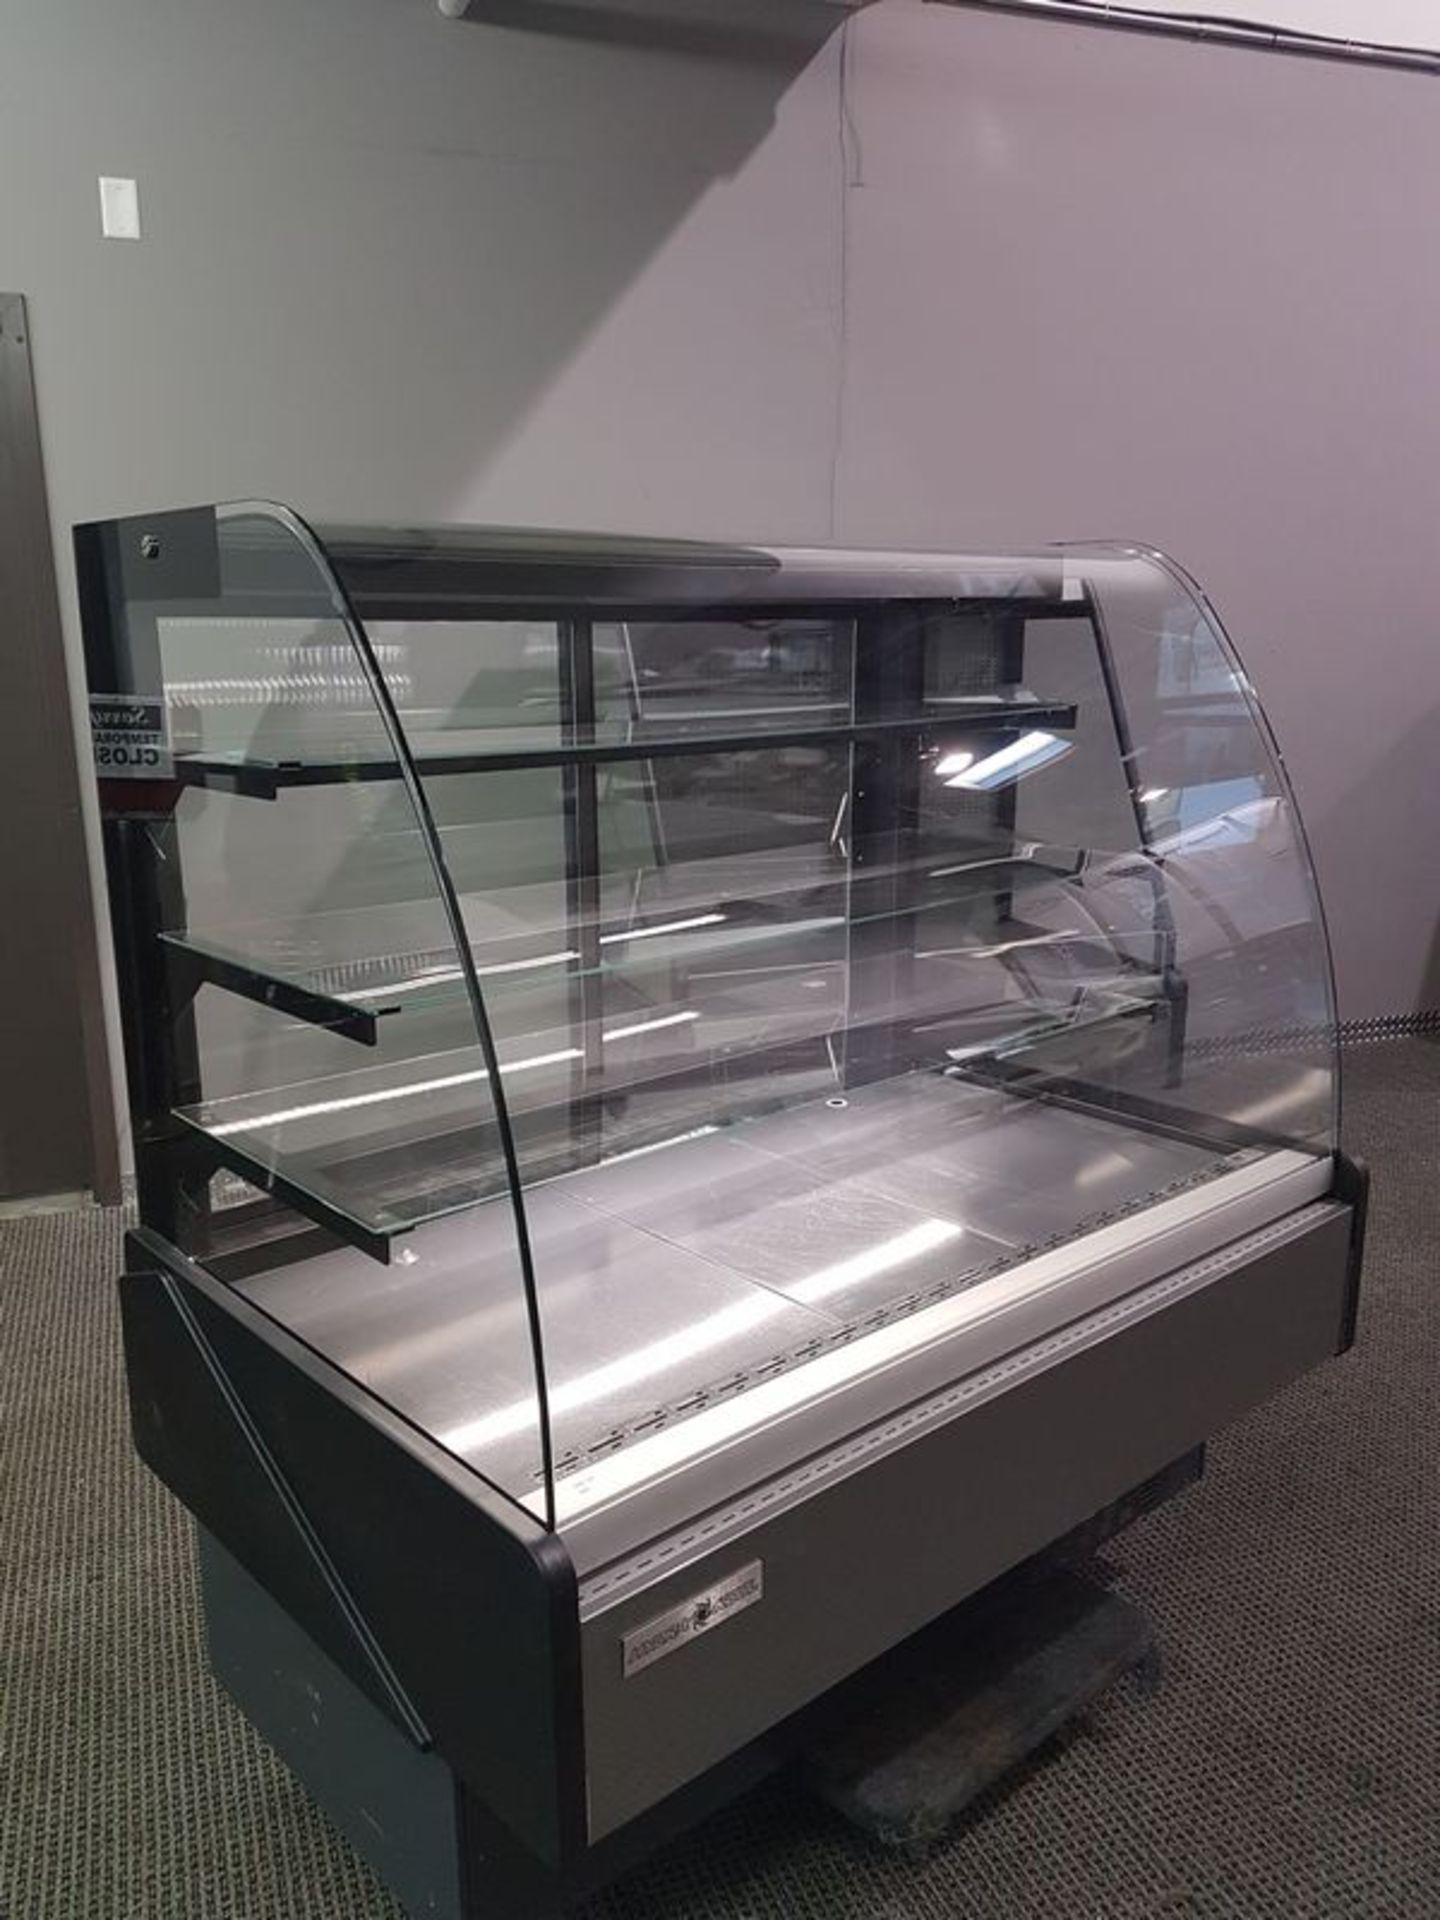 Hydra-Kool - Showroom Model KBD-CG-50-S Self Contained Cooler - New Cost Approx. $6500.00 - Bild 2 aus 2